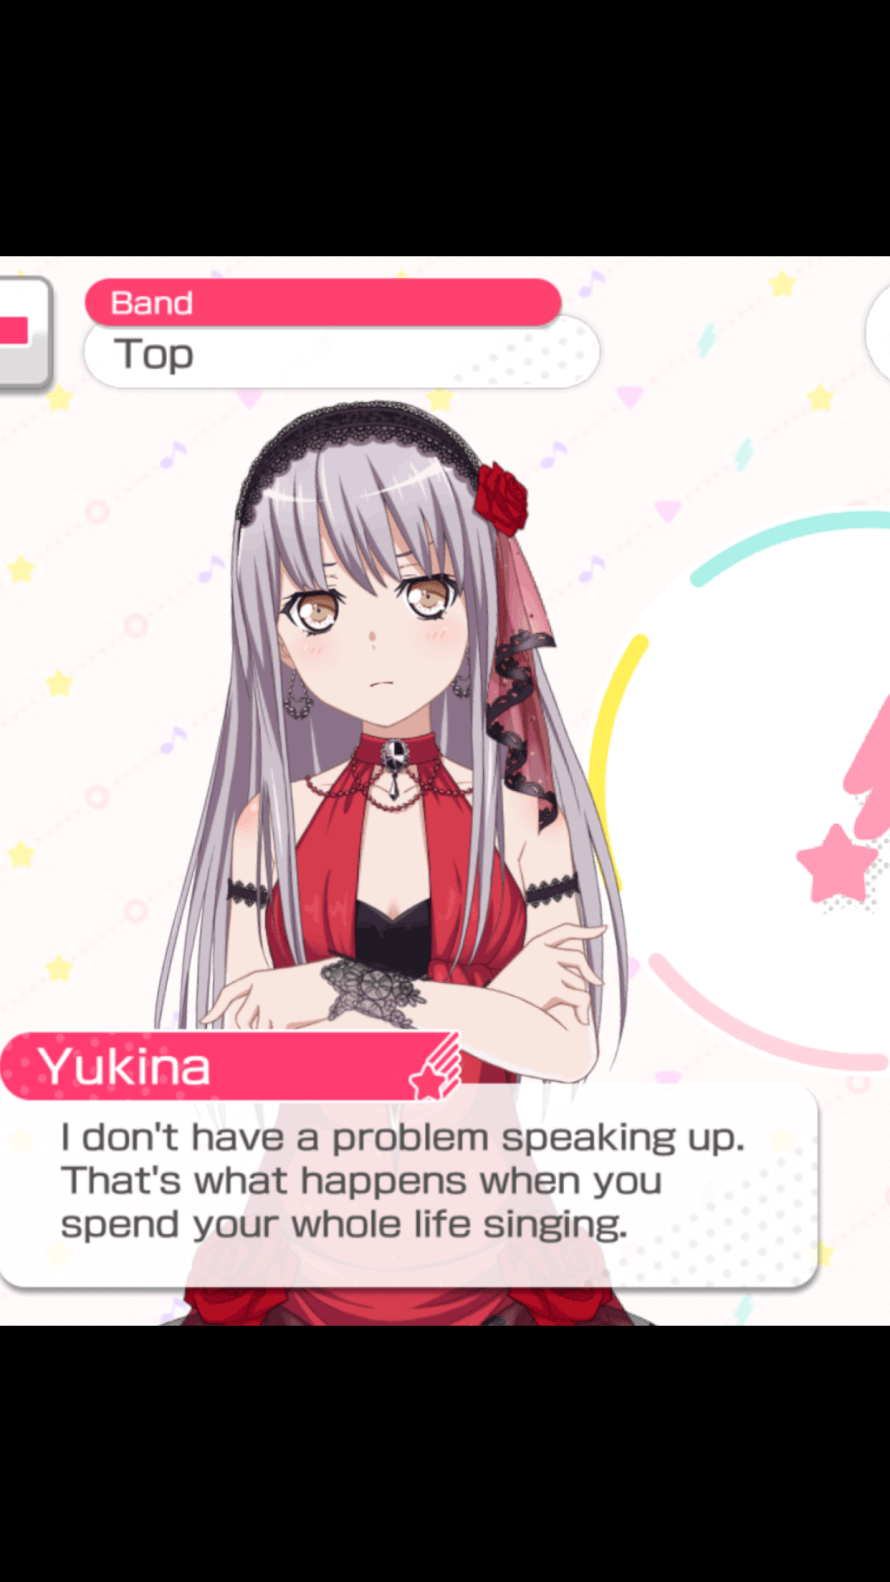 im continually reminded that yukina is actually such a G lmao i cant get enough, she might have to...